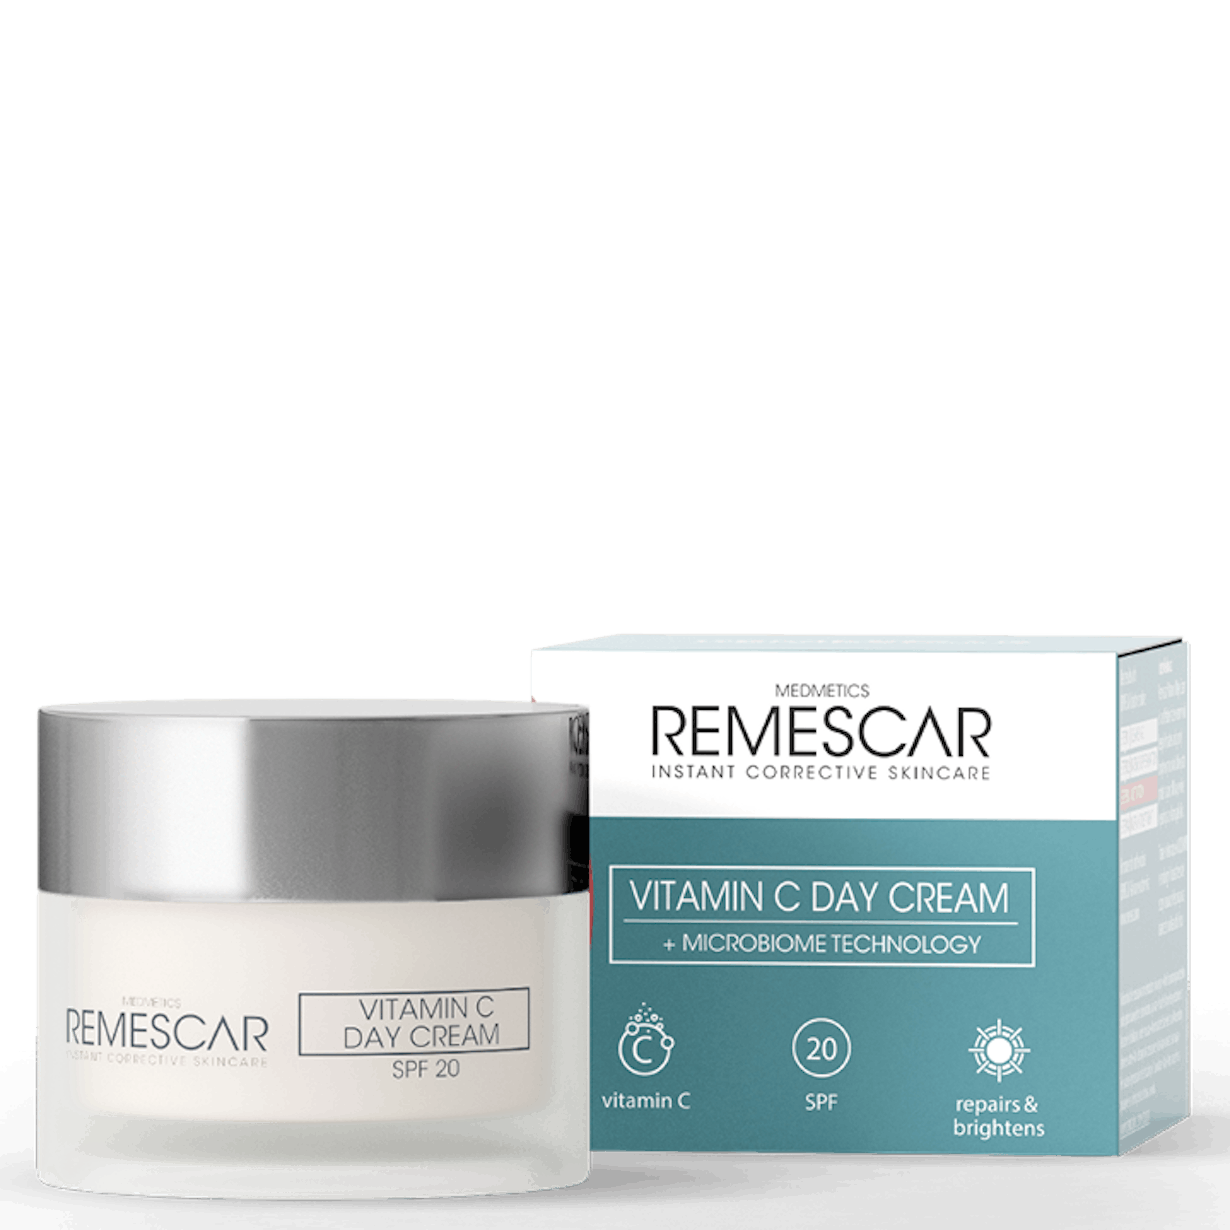 Remescar pdp pictures website and amazon 2000x2000px vitamin c day cream NL indd